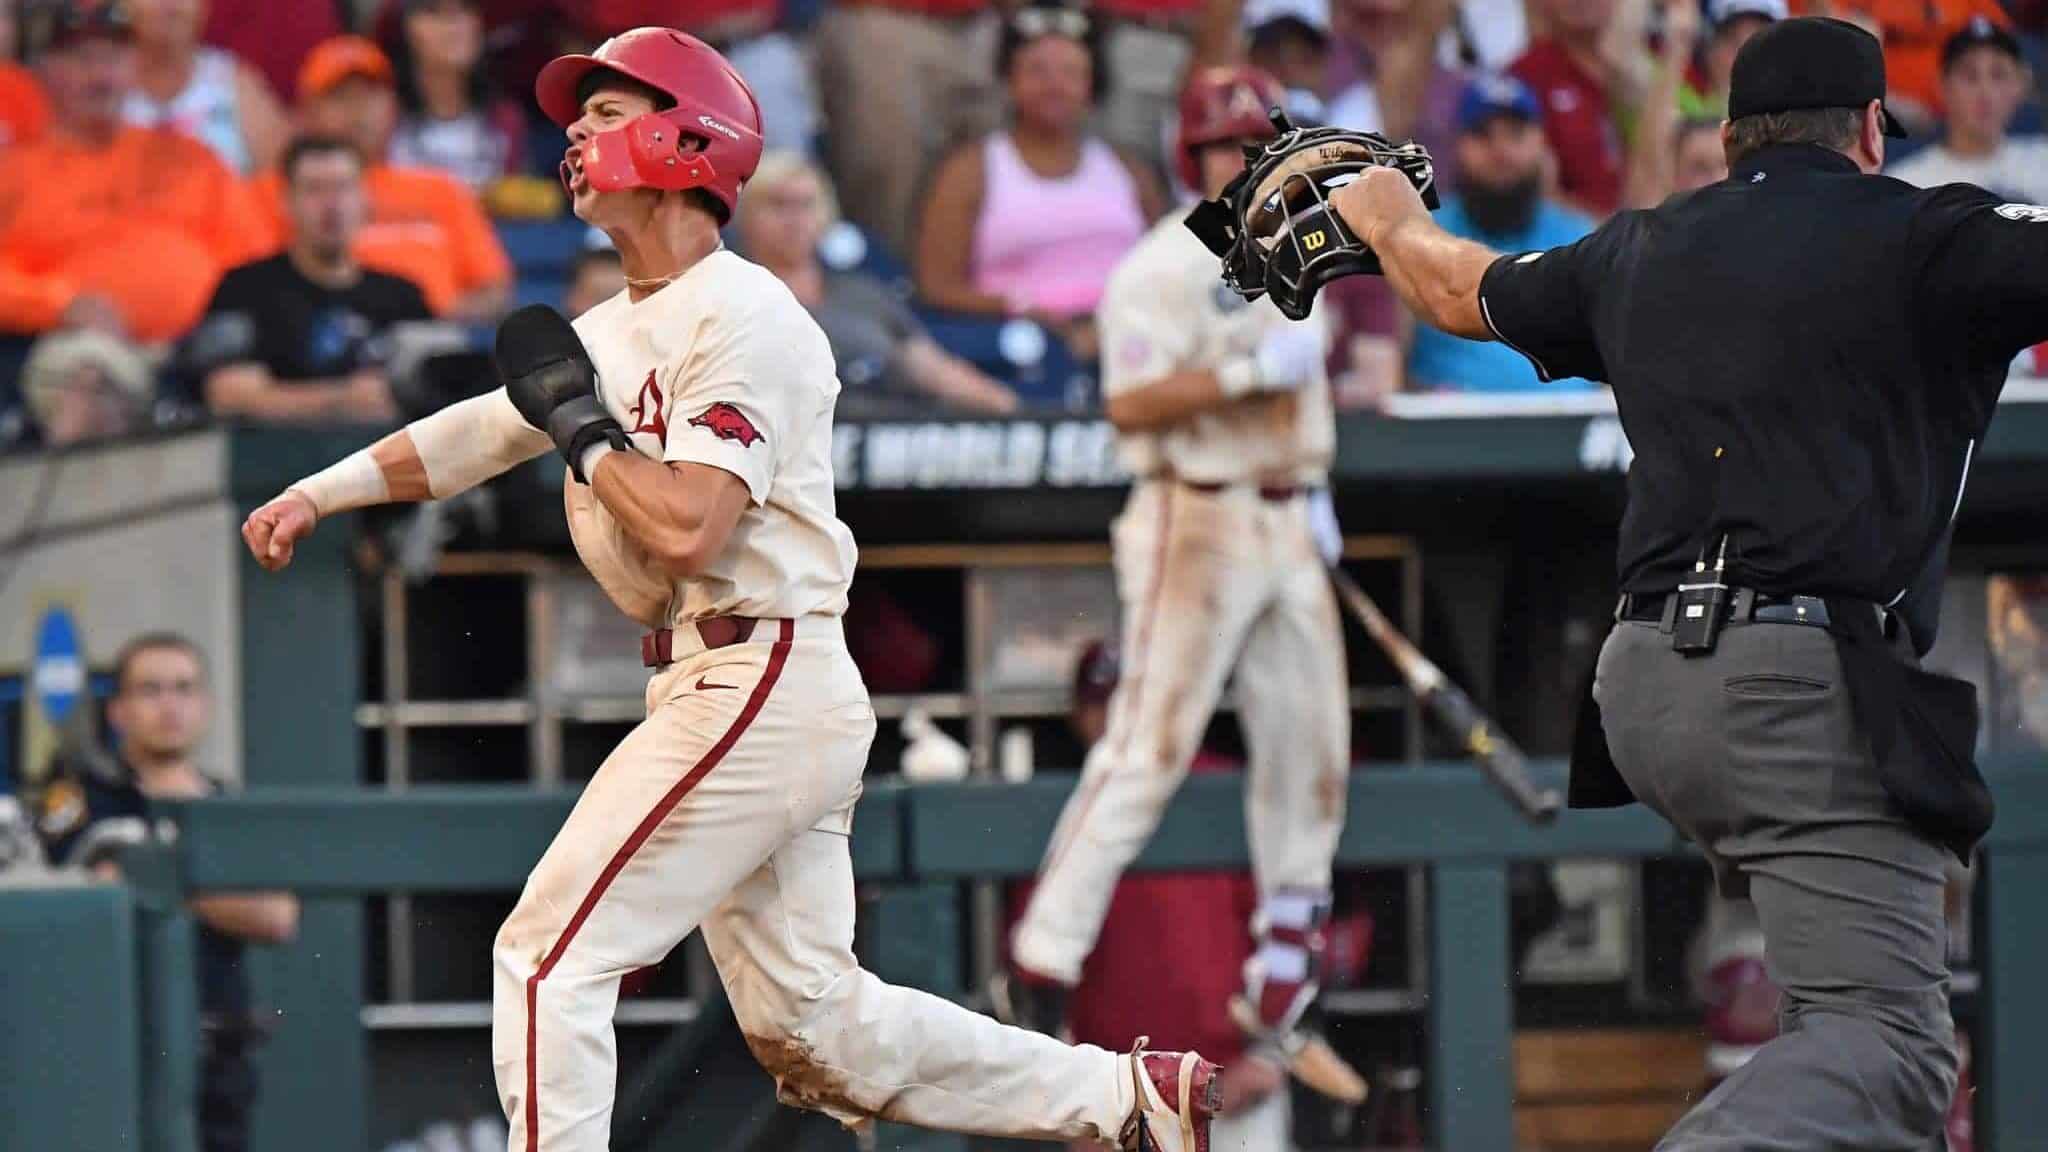 Omaha, NE - JUNE 27: Infielder Casey Martin #15 of the Arkansas Razorbacks celebrates after scoring a run in the fifth inning against the Oregon State Beavers during game two of the College World Series Championship Series on June 27, 2018 at TD Ameritrade Park in Omaha, Nebraska. New York Mets